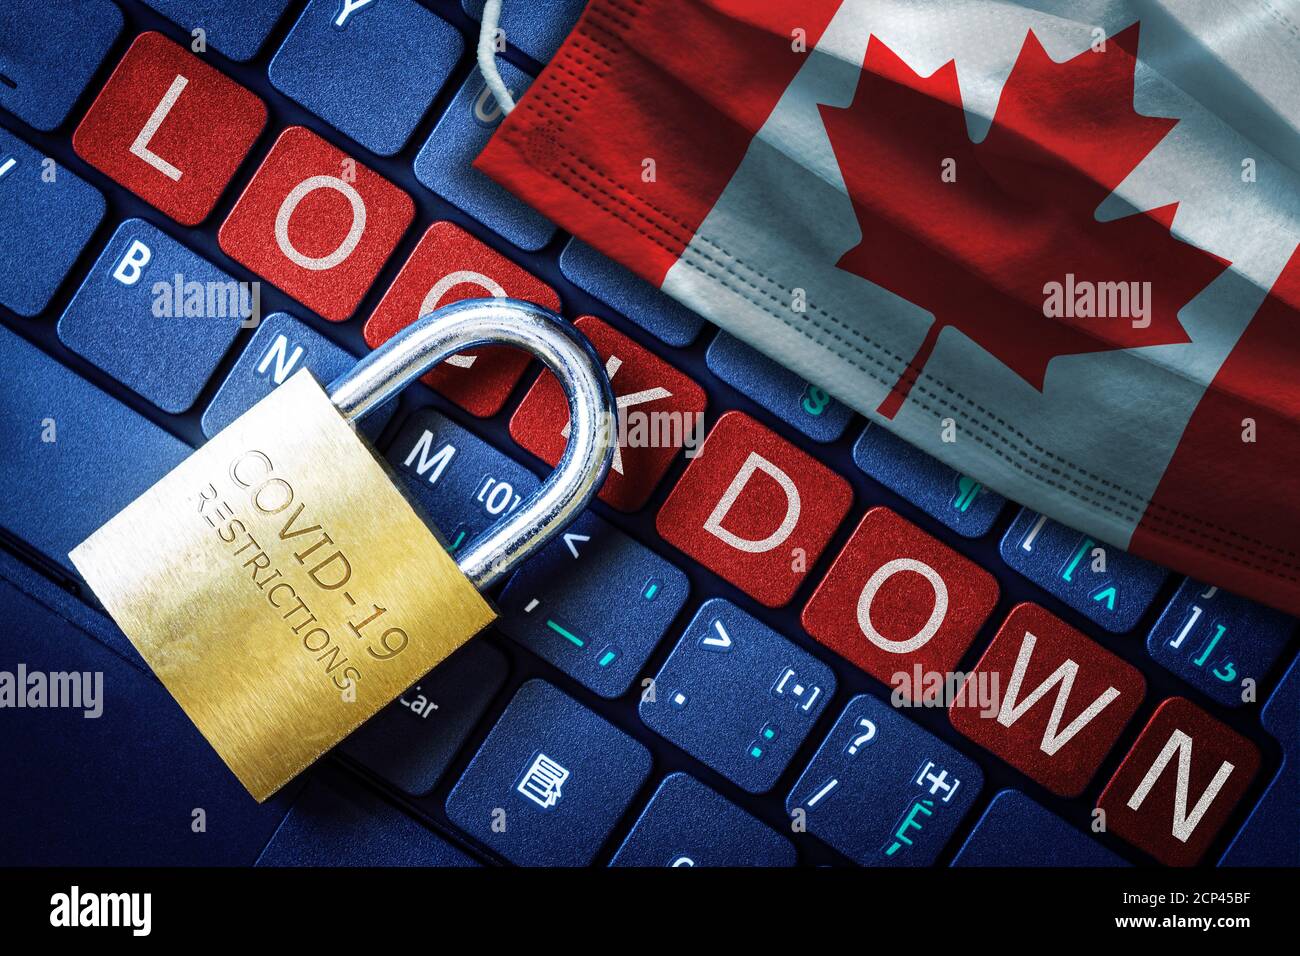 Canada COVID-19 coronavirus lockdown restrictions concept illustrated by padlock on laptop red alert keyboard buttons and face mask with Canadian flag Stock Photo